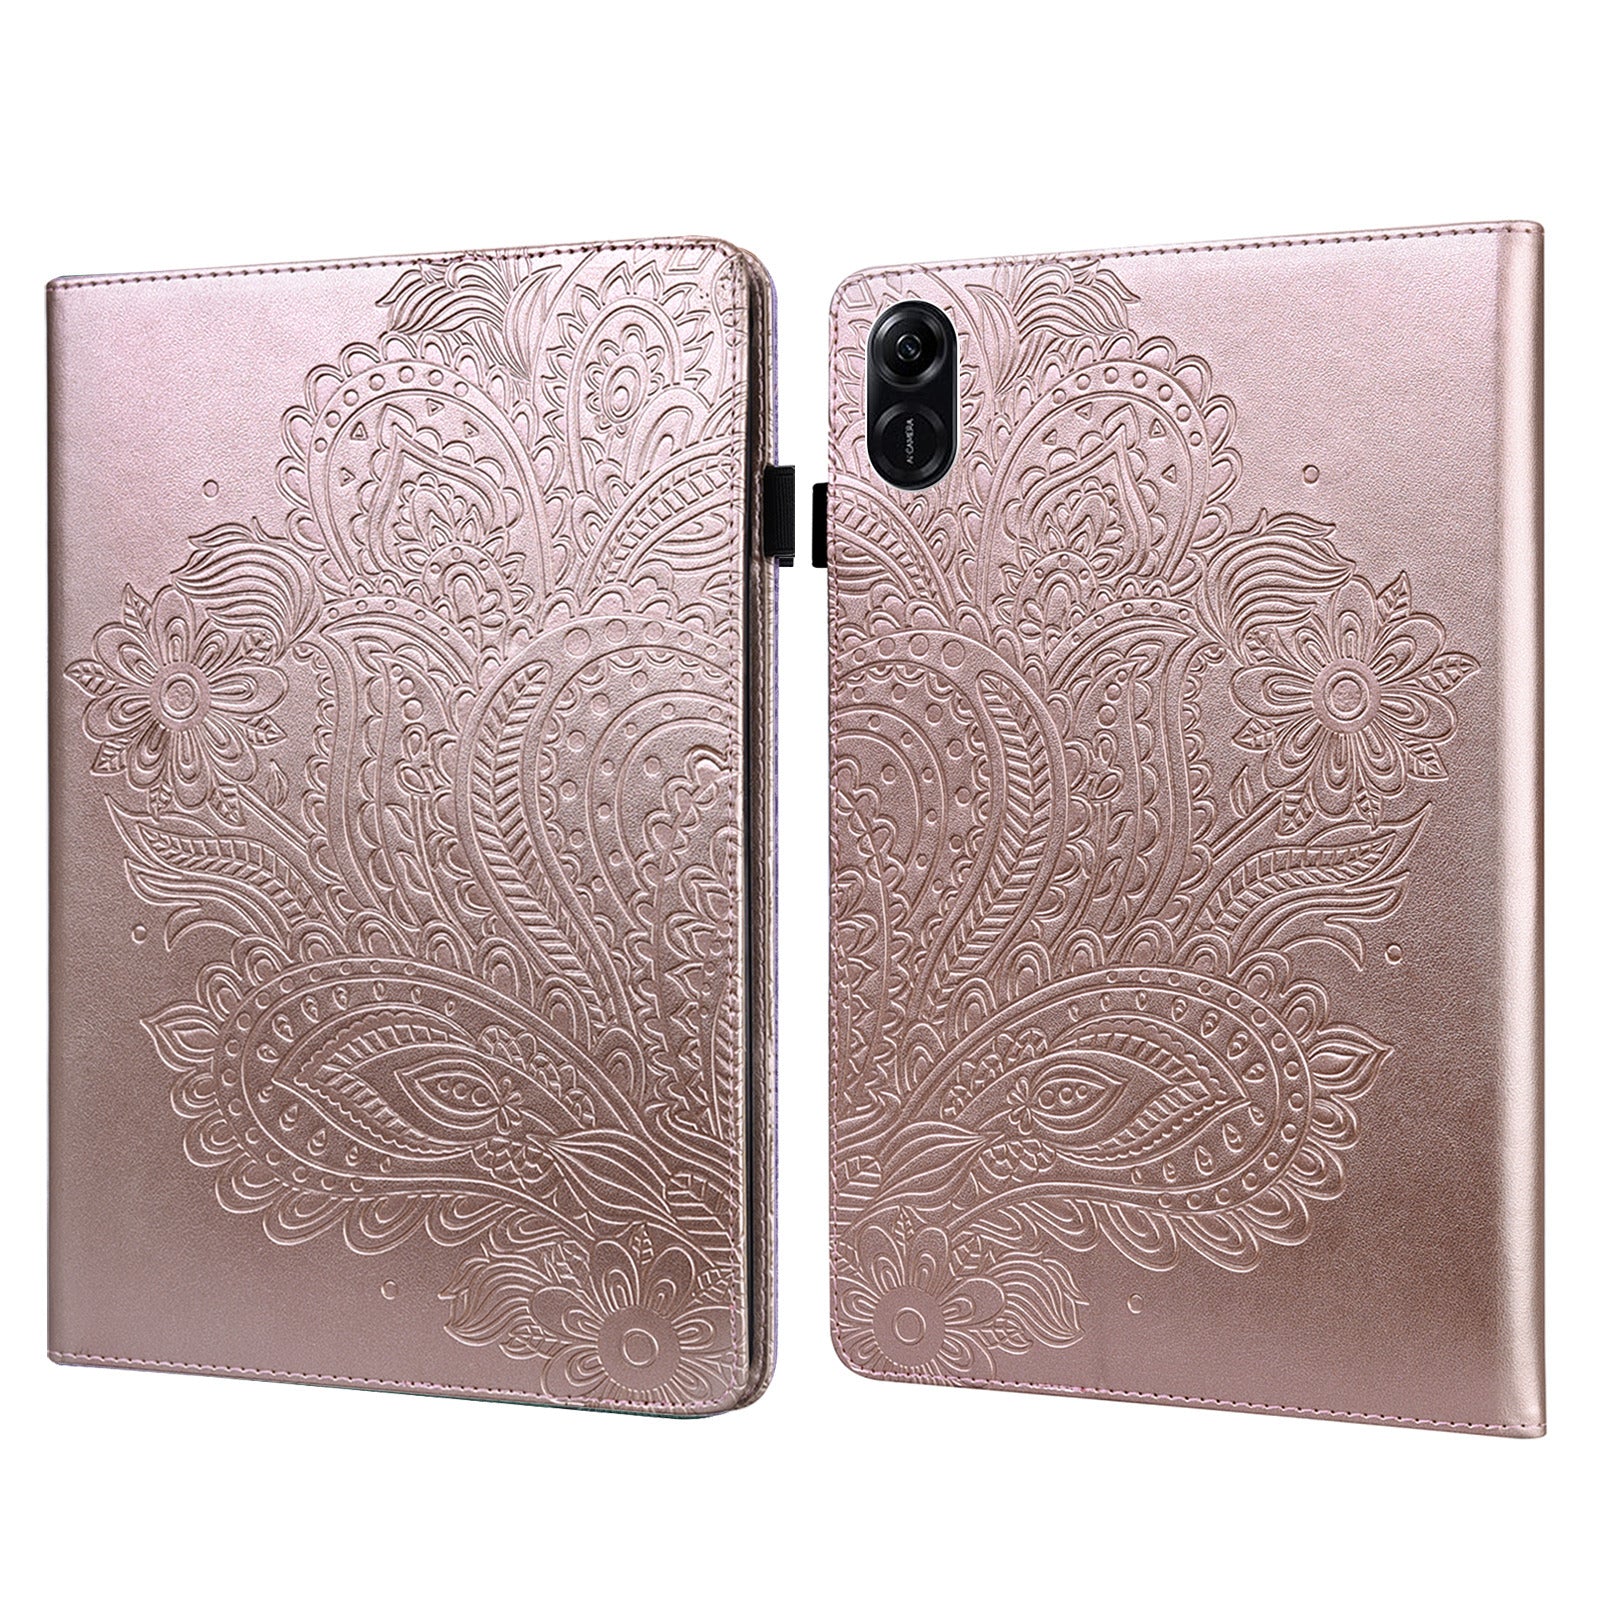 For Honor Pad X9 Case Flower Pattern PU Leather Folio Stand Tablet Cover with Card Slots - Rose Gold